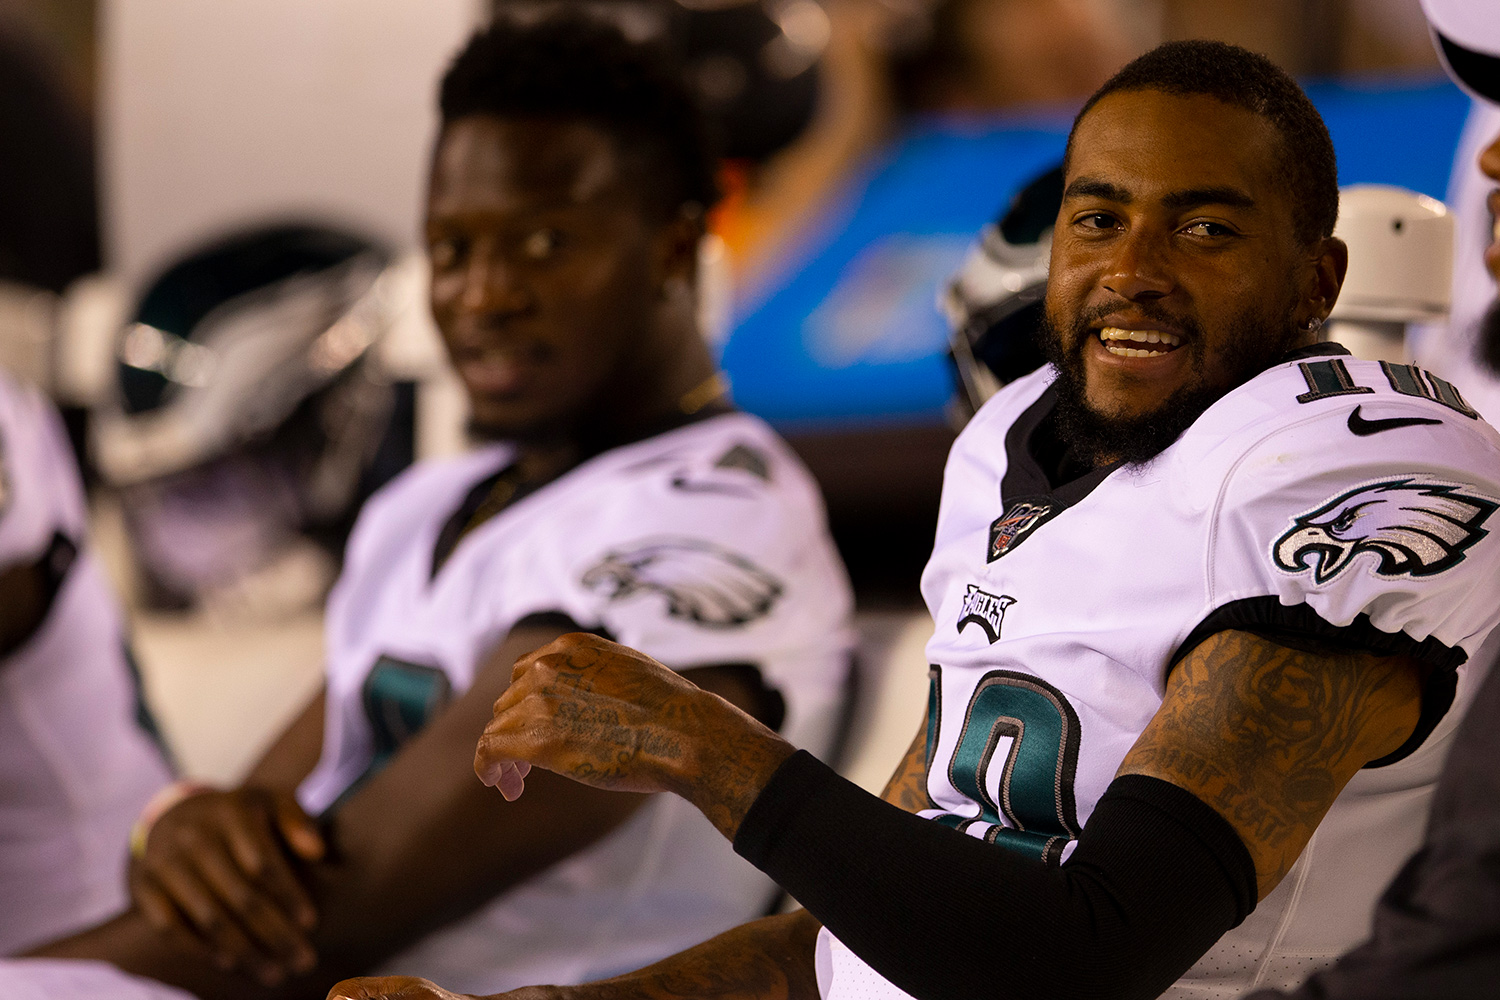 DeSean Jackson on Fashion and Finding a Personal Style - The Manual